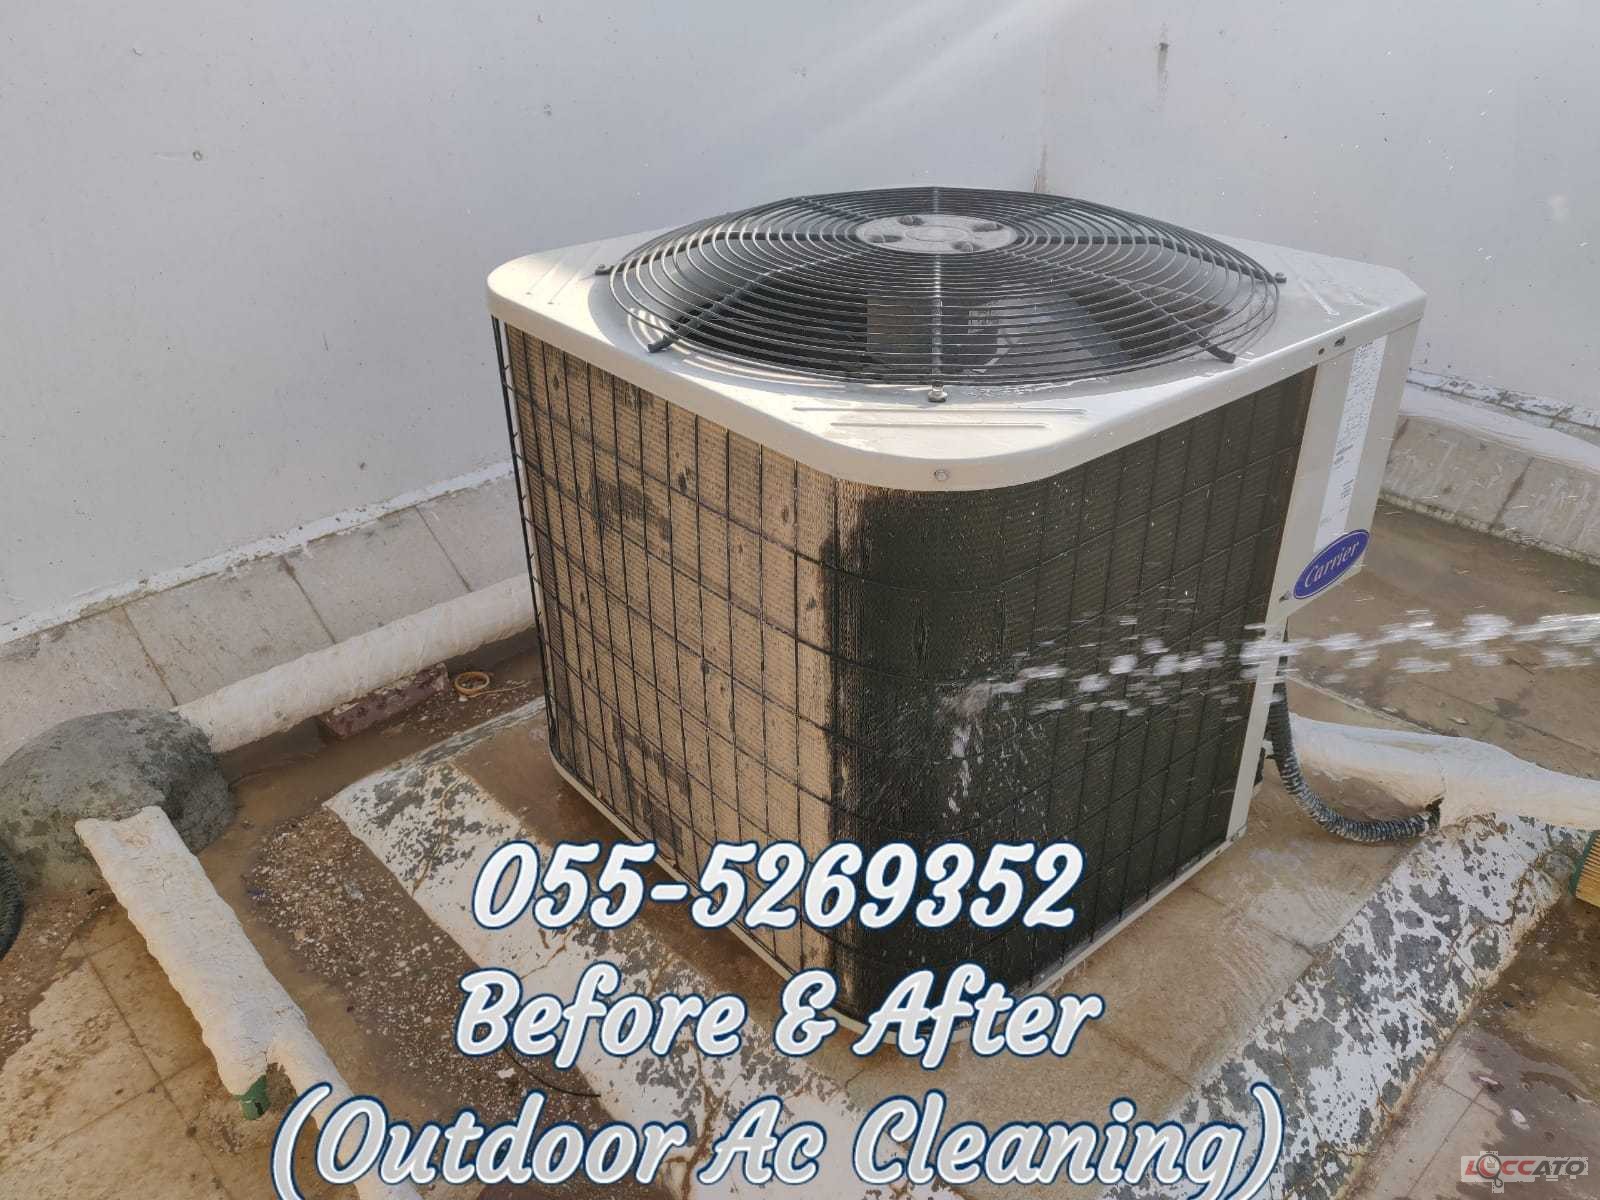 Creative Air Conditioning Maintenance Works